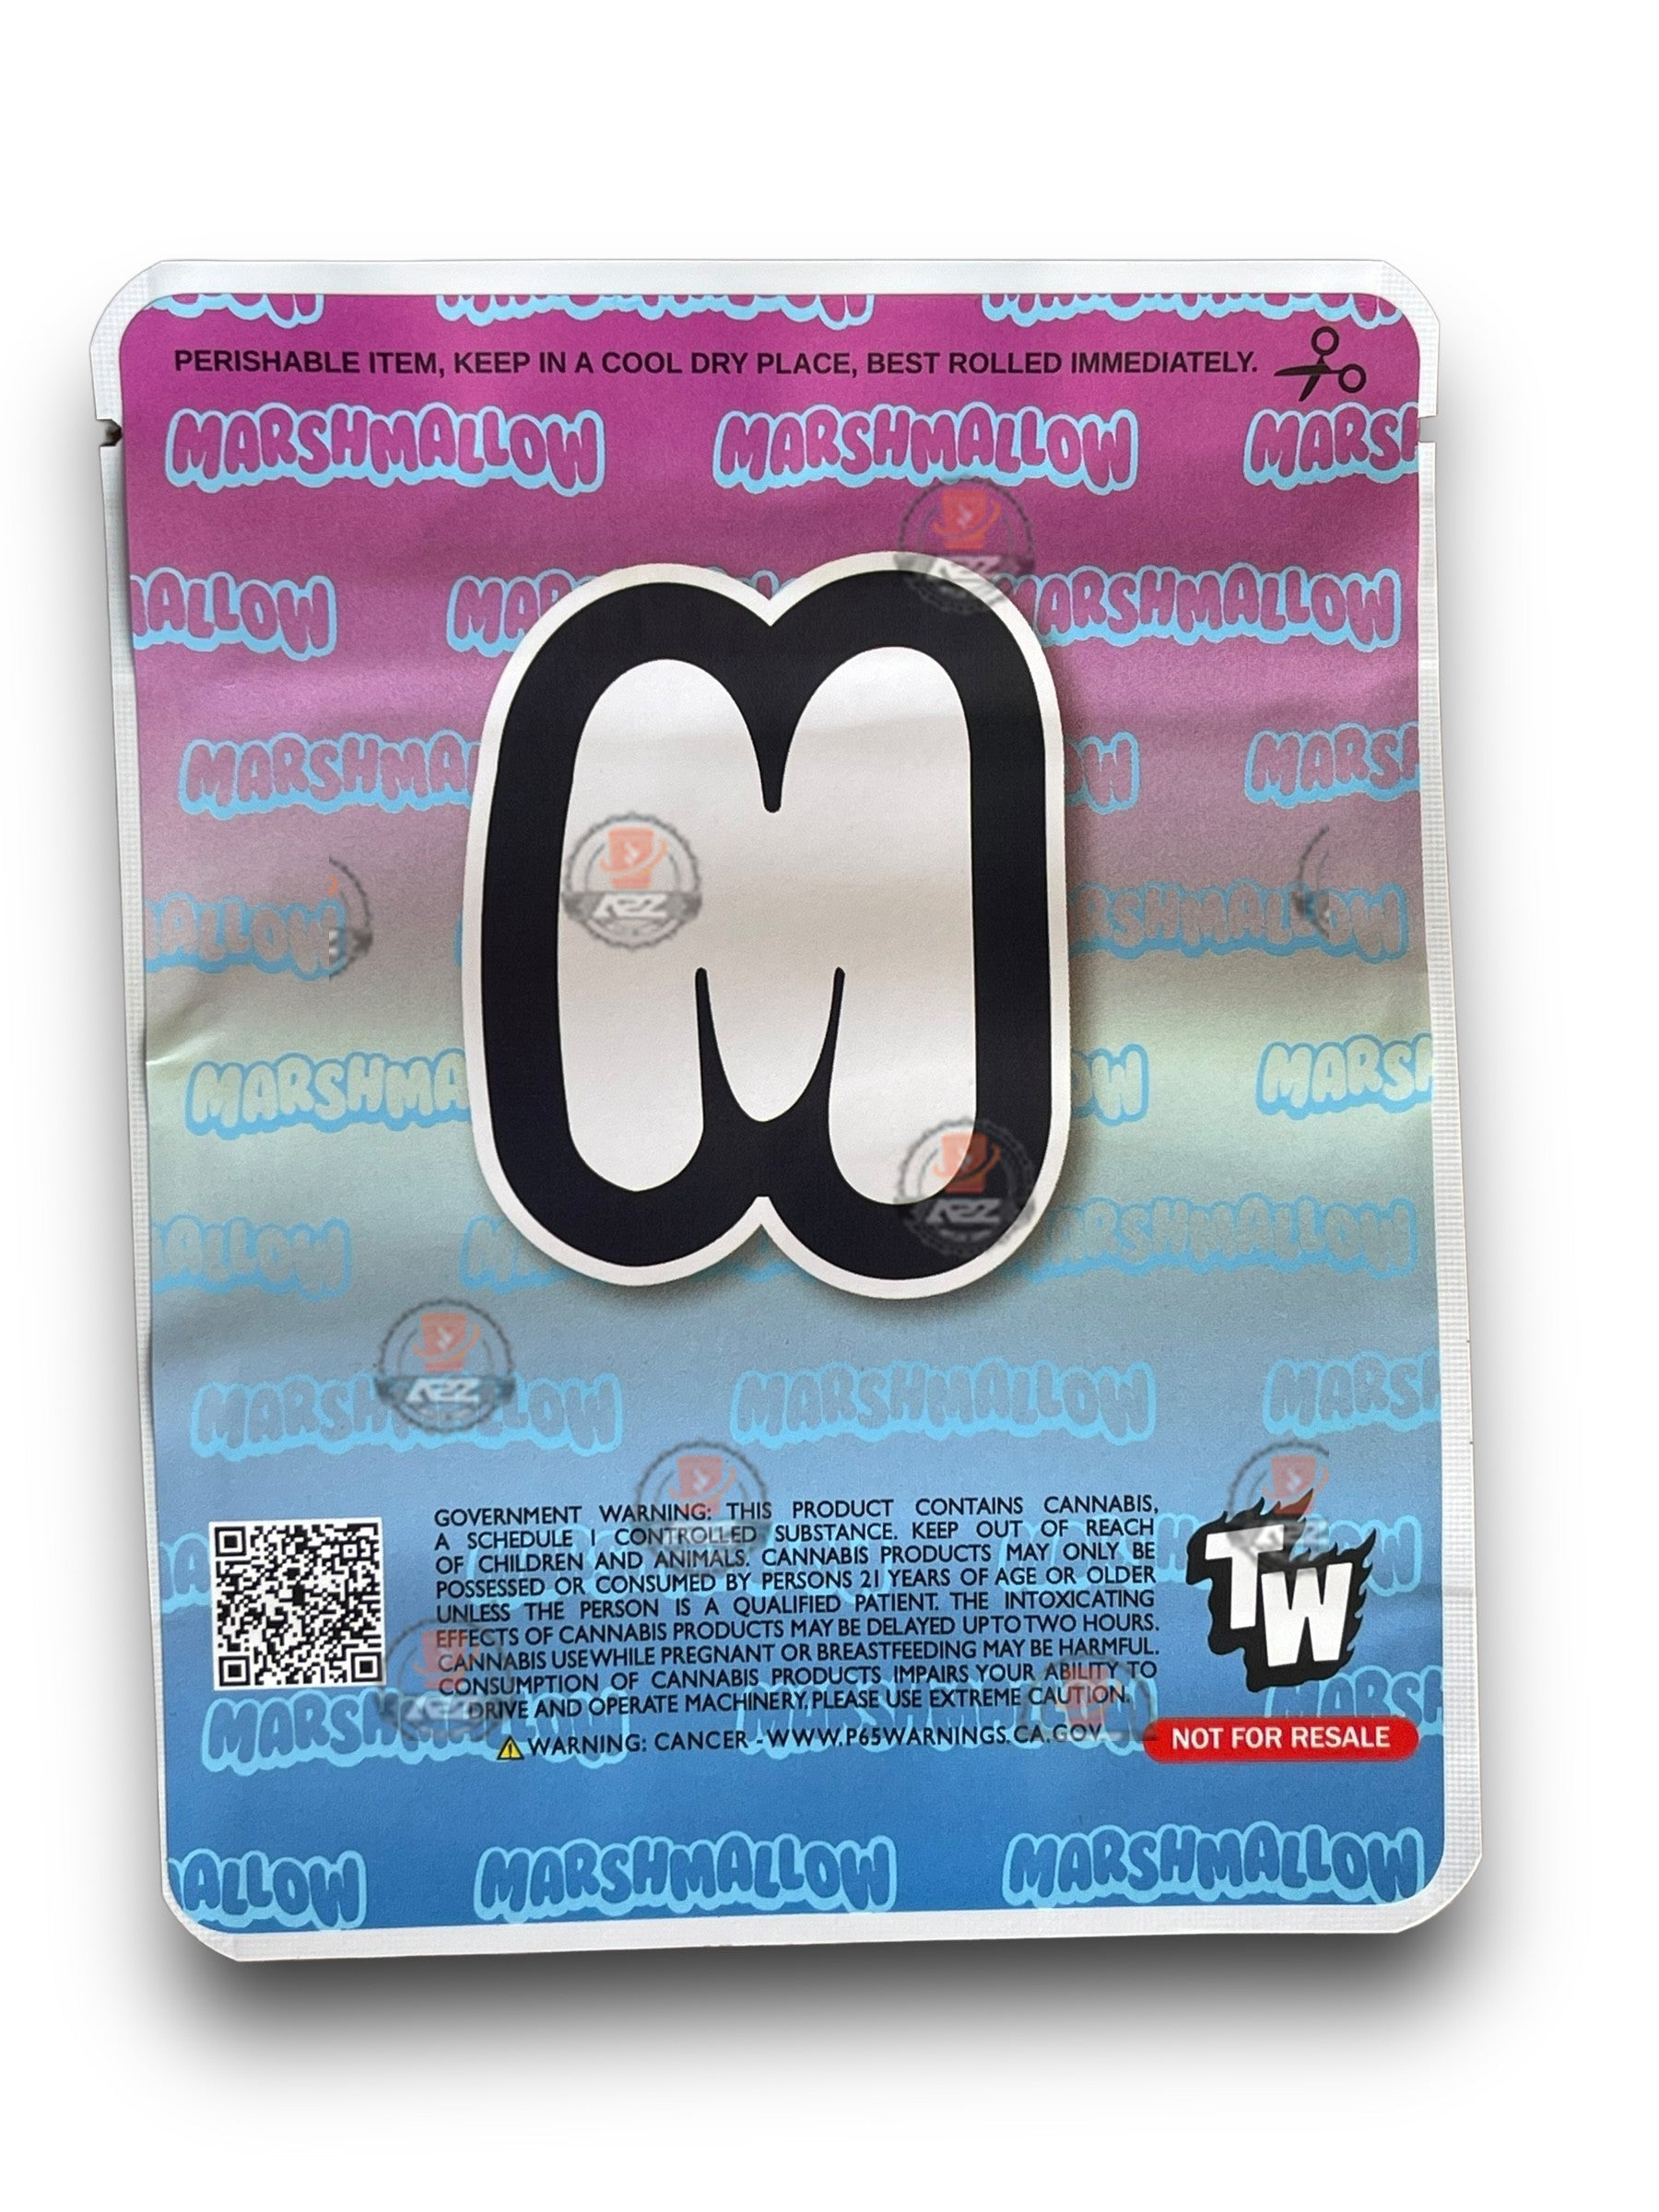 Sprinklez Bubblegum Marshmallow 3.5G Mylar Bags -With stickers and label